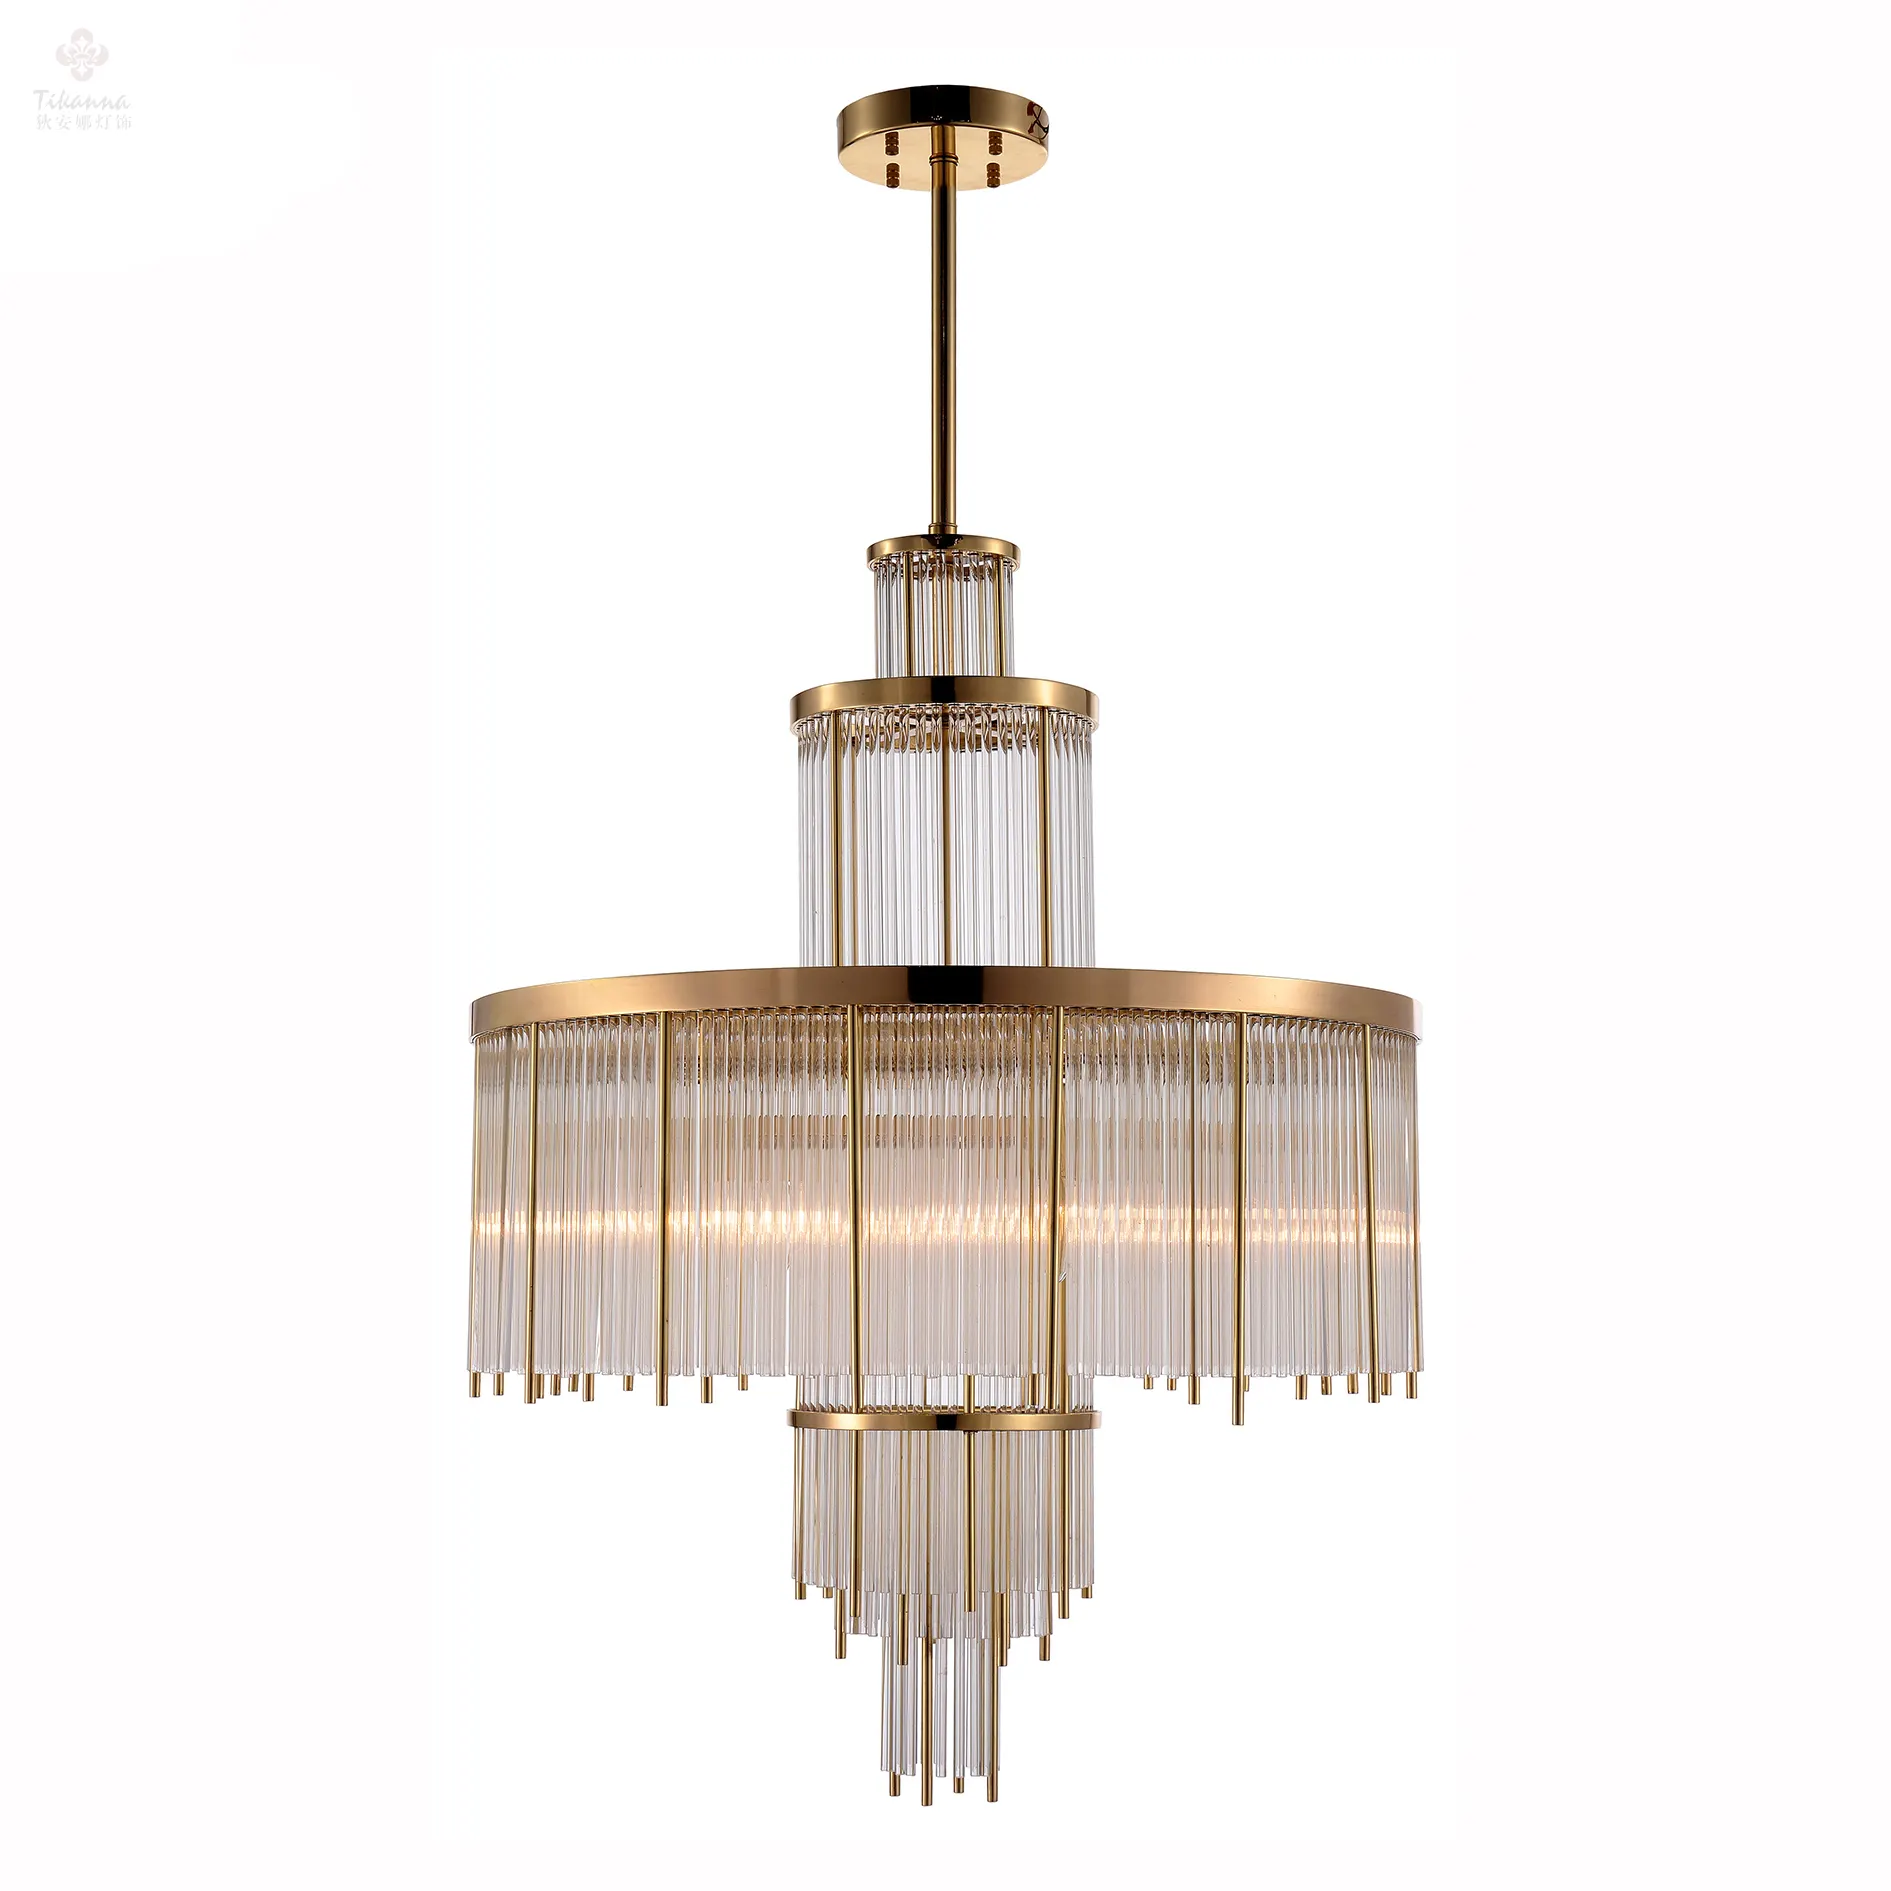 Tikanna New 2020 Modern Clear Crystal Glass Brass Round pendant chandelier Lamp for Home Decoration